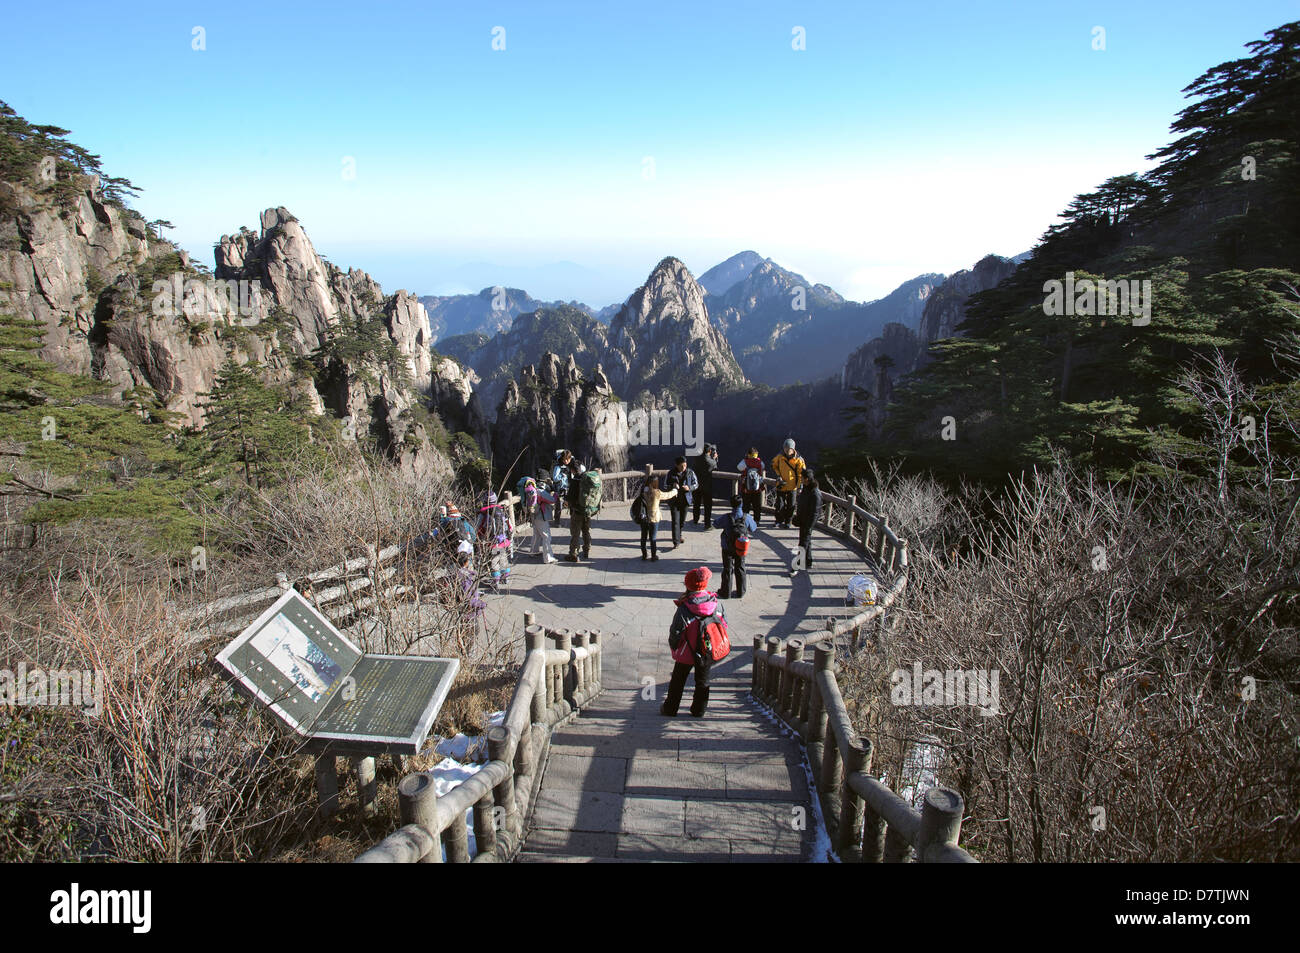 Tourists at the 'Flower Blooming on Brush Tip' scenic spot, Huangshan, China Stock Photo